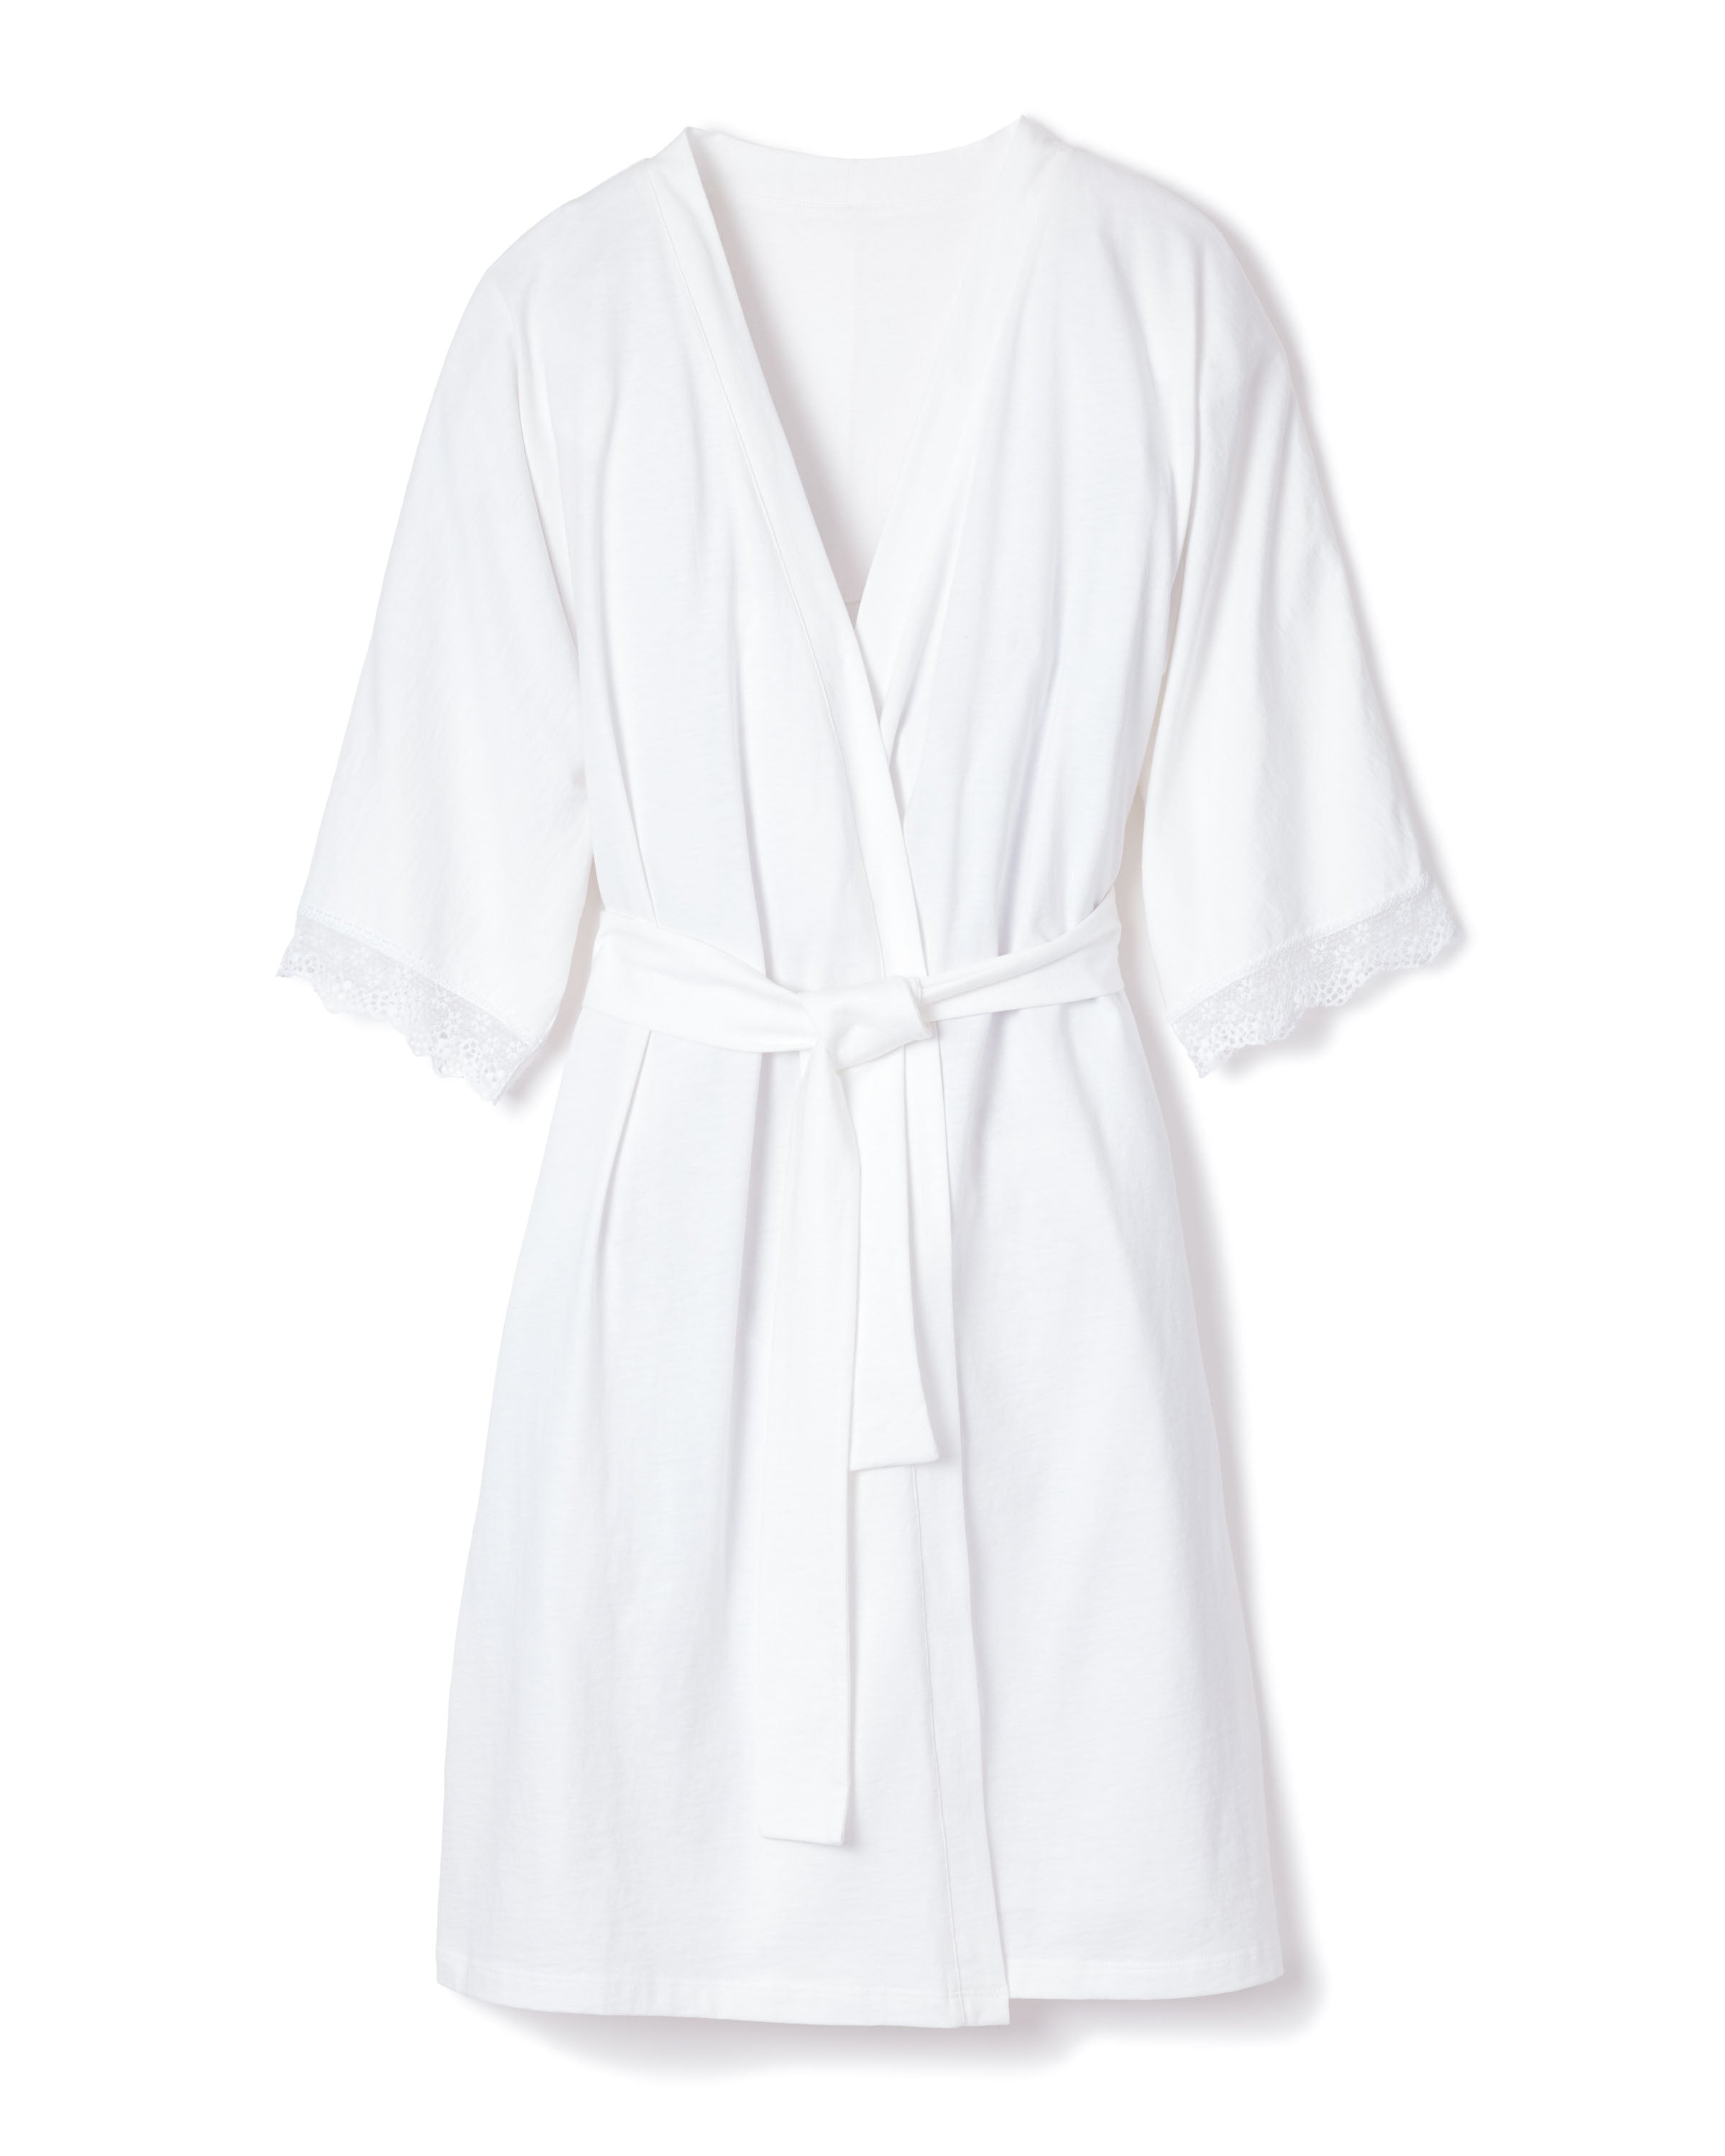 Cososa Cotton Sleep Dress  We Uncovered 19 Chic White Dresses on